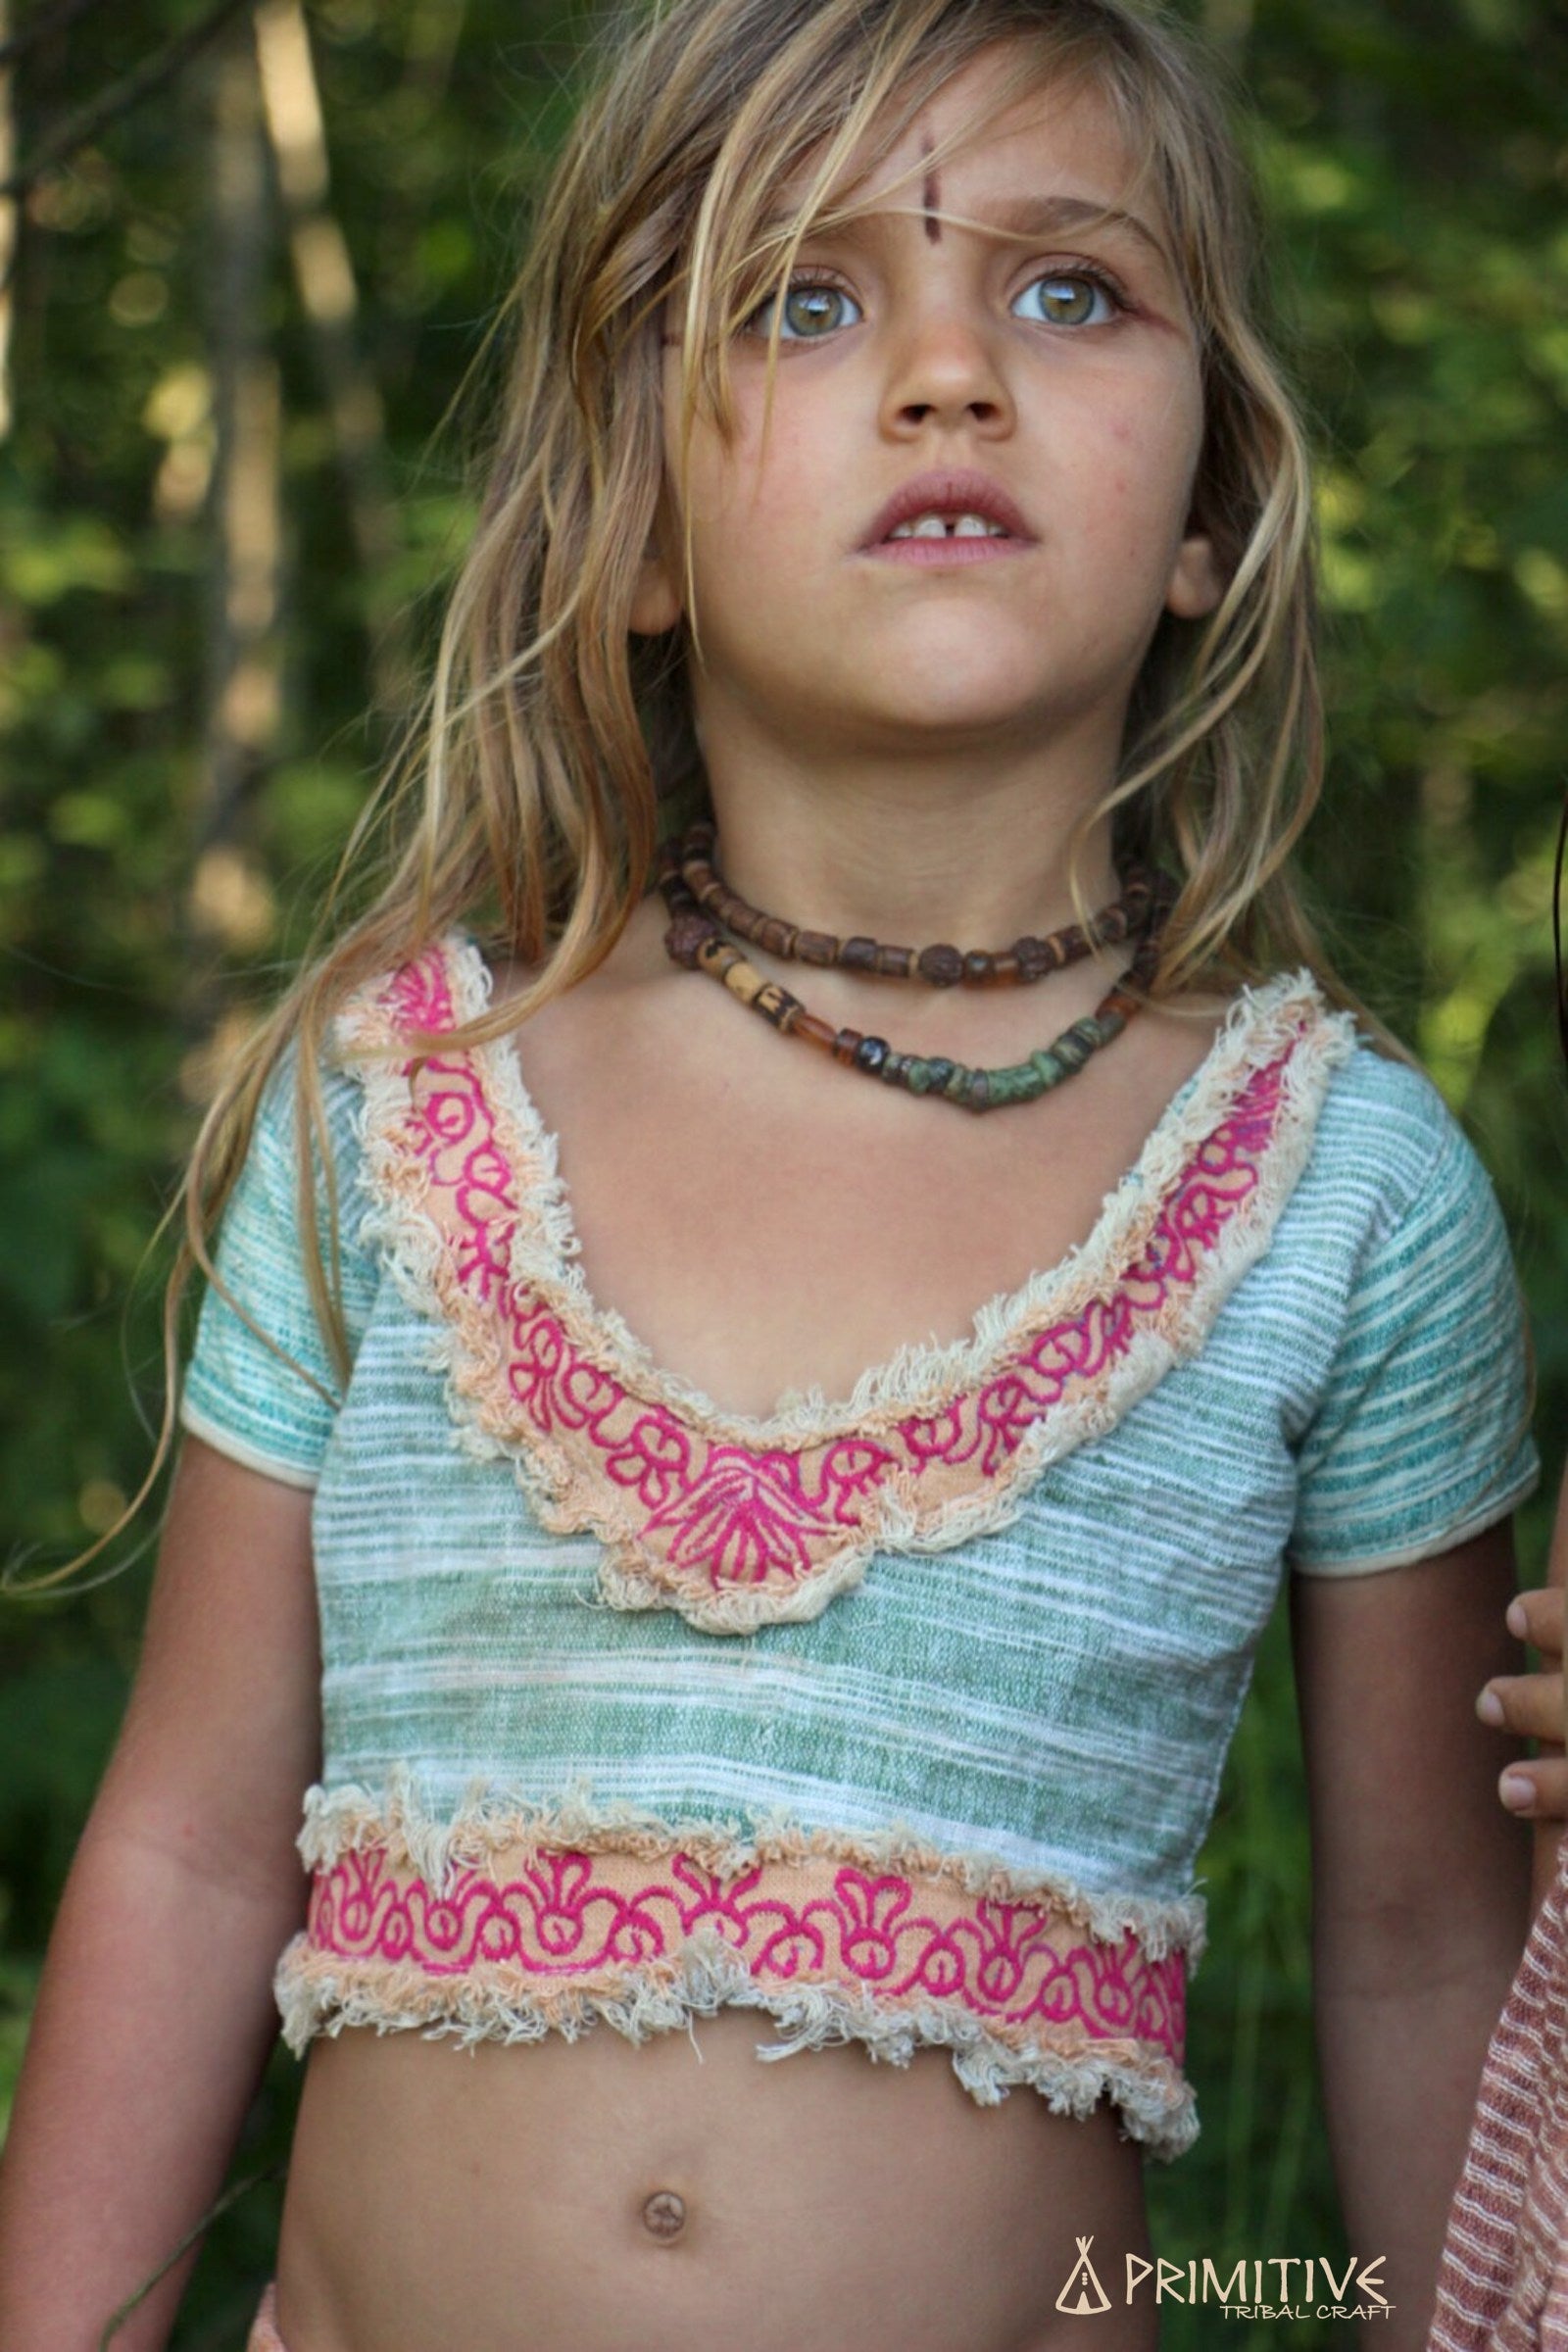 Tribal Sari Top For Girls ⋙ with Hand Embroidery ⋘